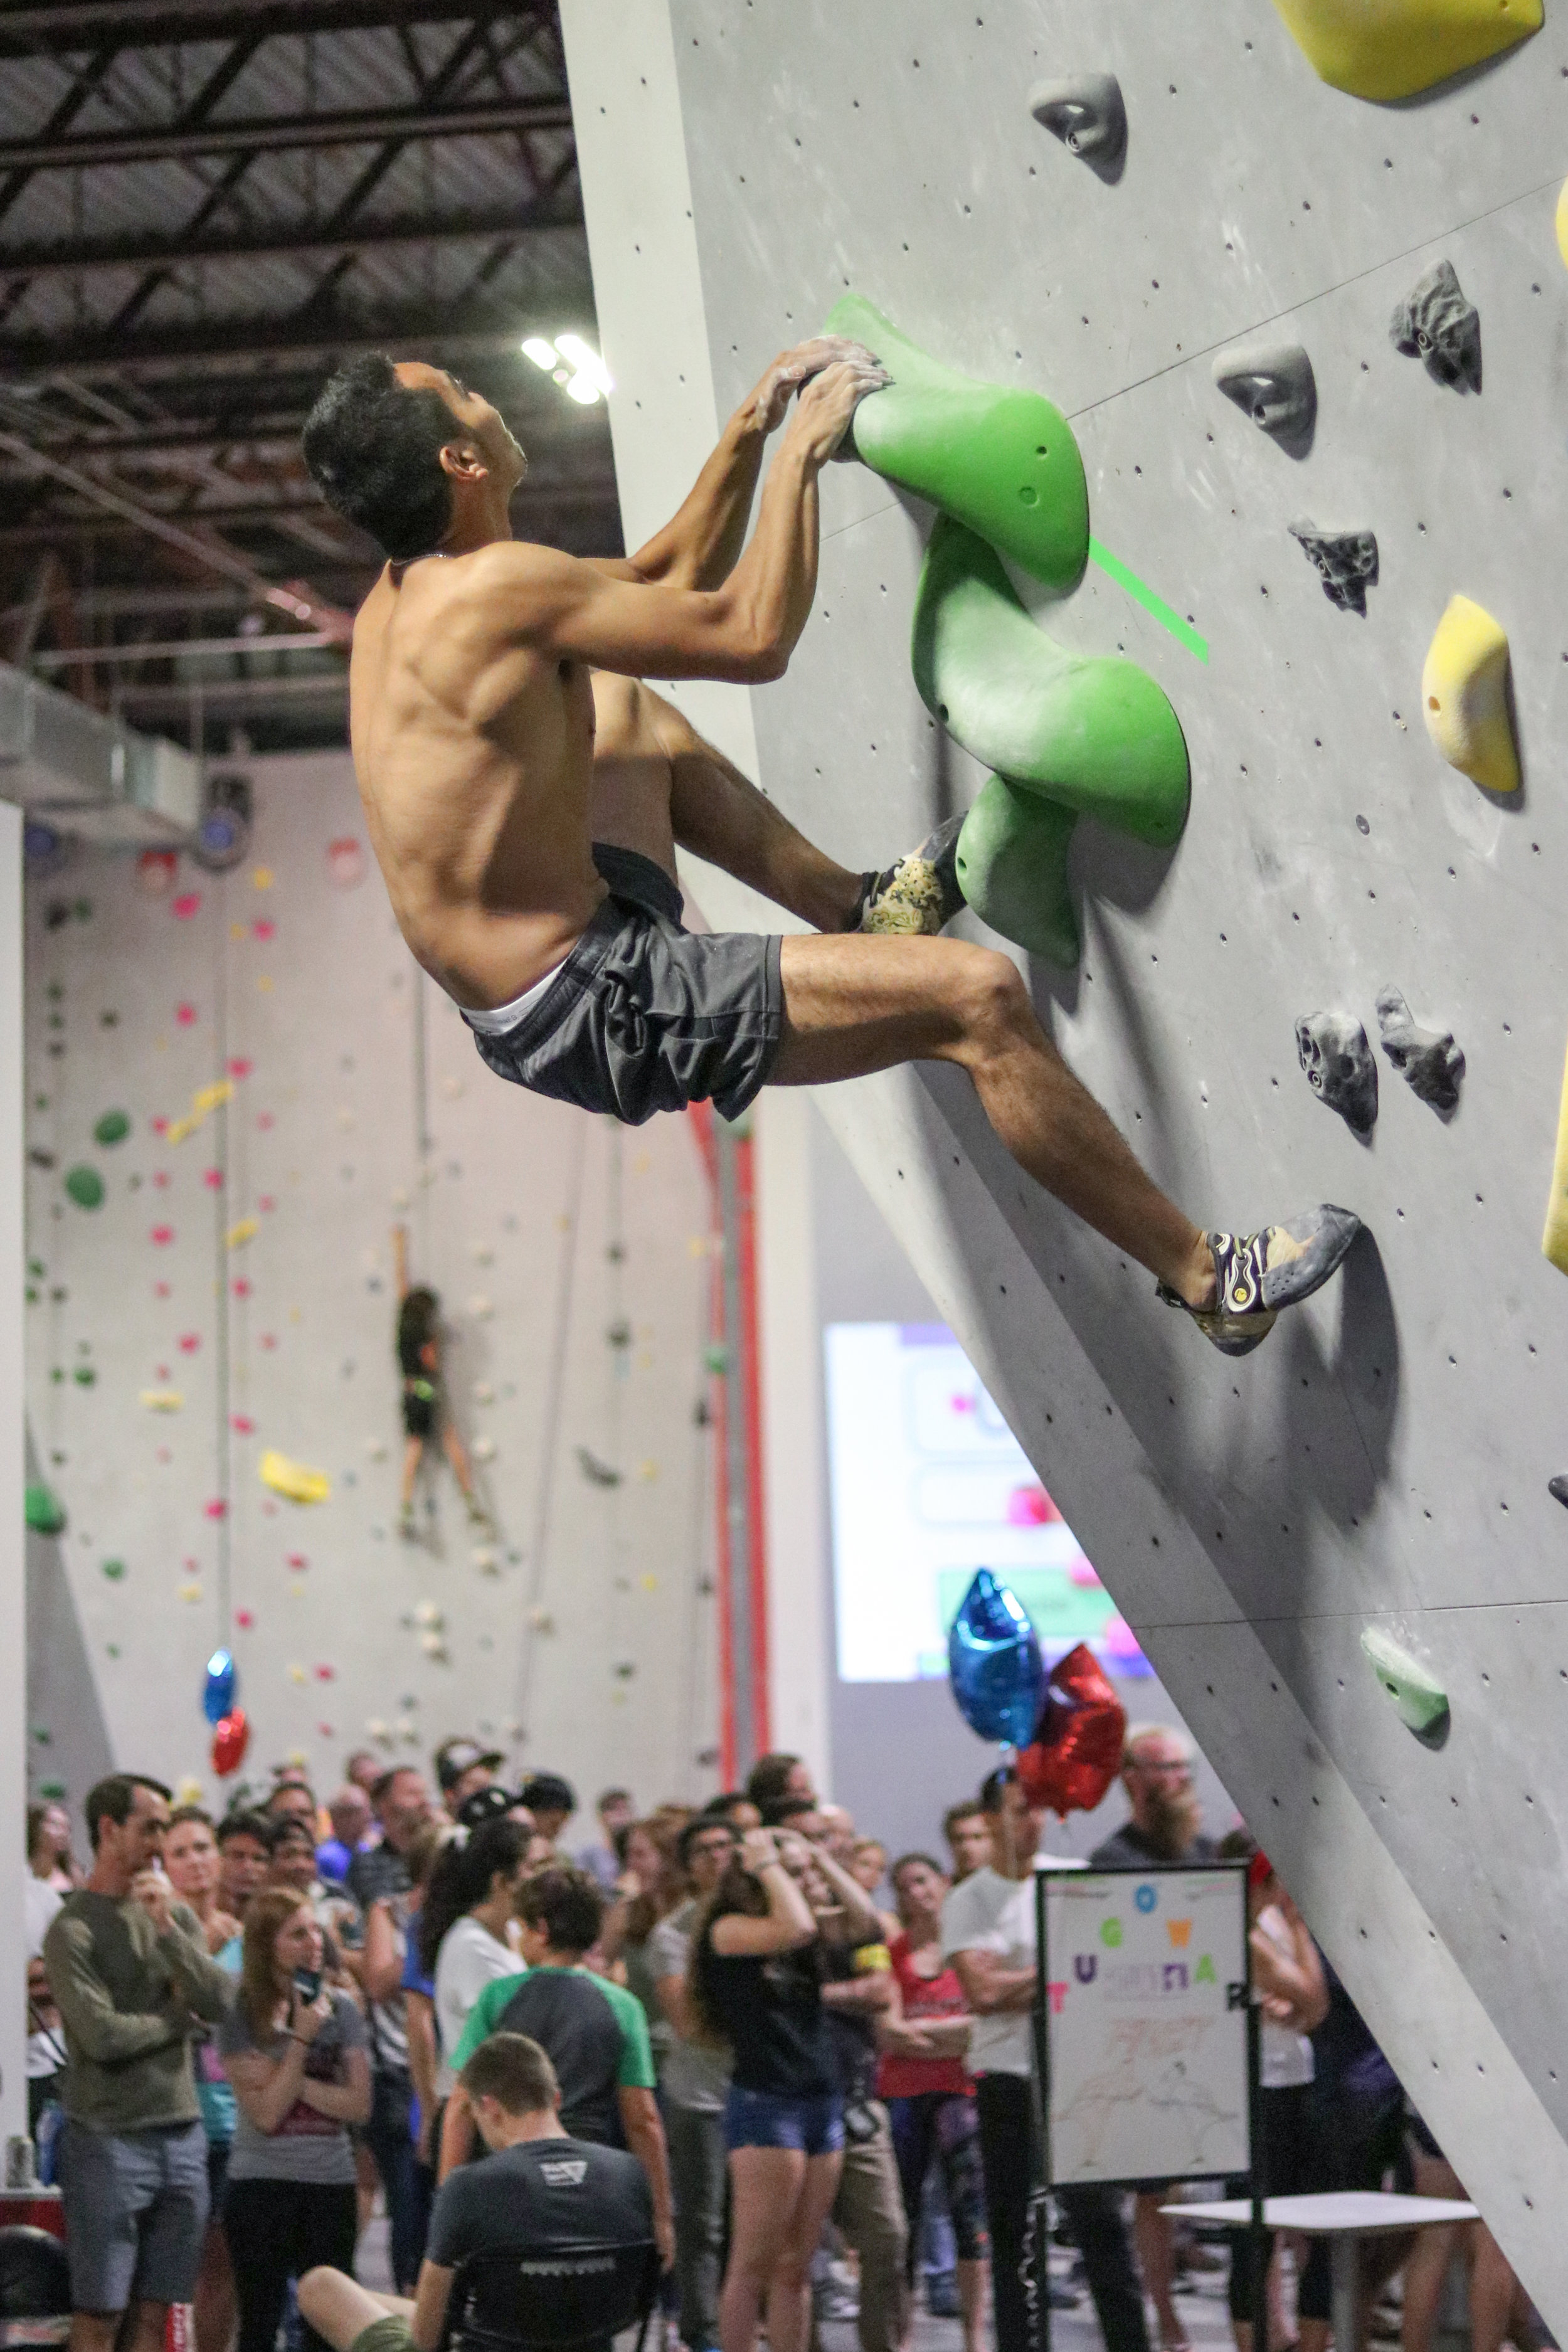 High-Kick-Photography-Vertical-Ventures-St-Pete-Florida-Indoor-Rock-Climbing-Competition-Active-Sports-Lifestyle-LR-3.jpg